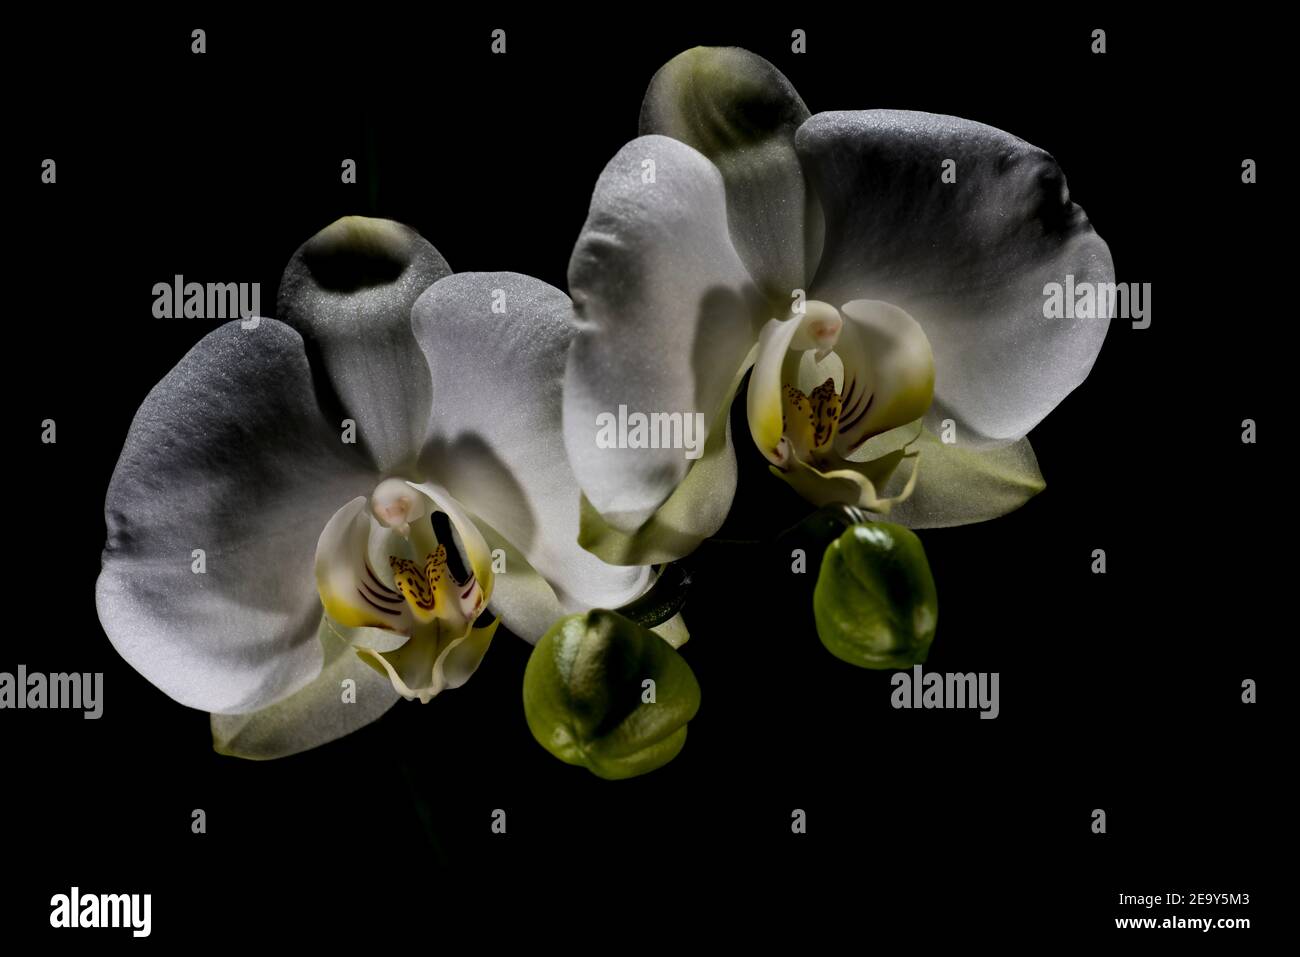 Close up of inflorescence of Phalaenopsis orchid against a black background, Genoa, Italy Stock Photo